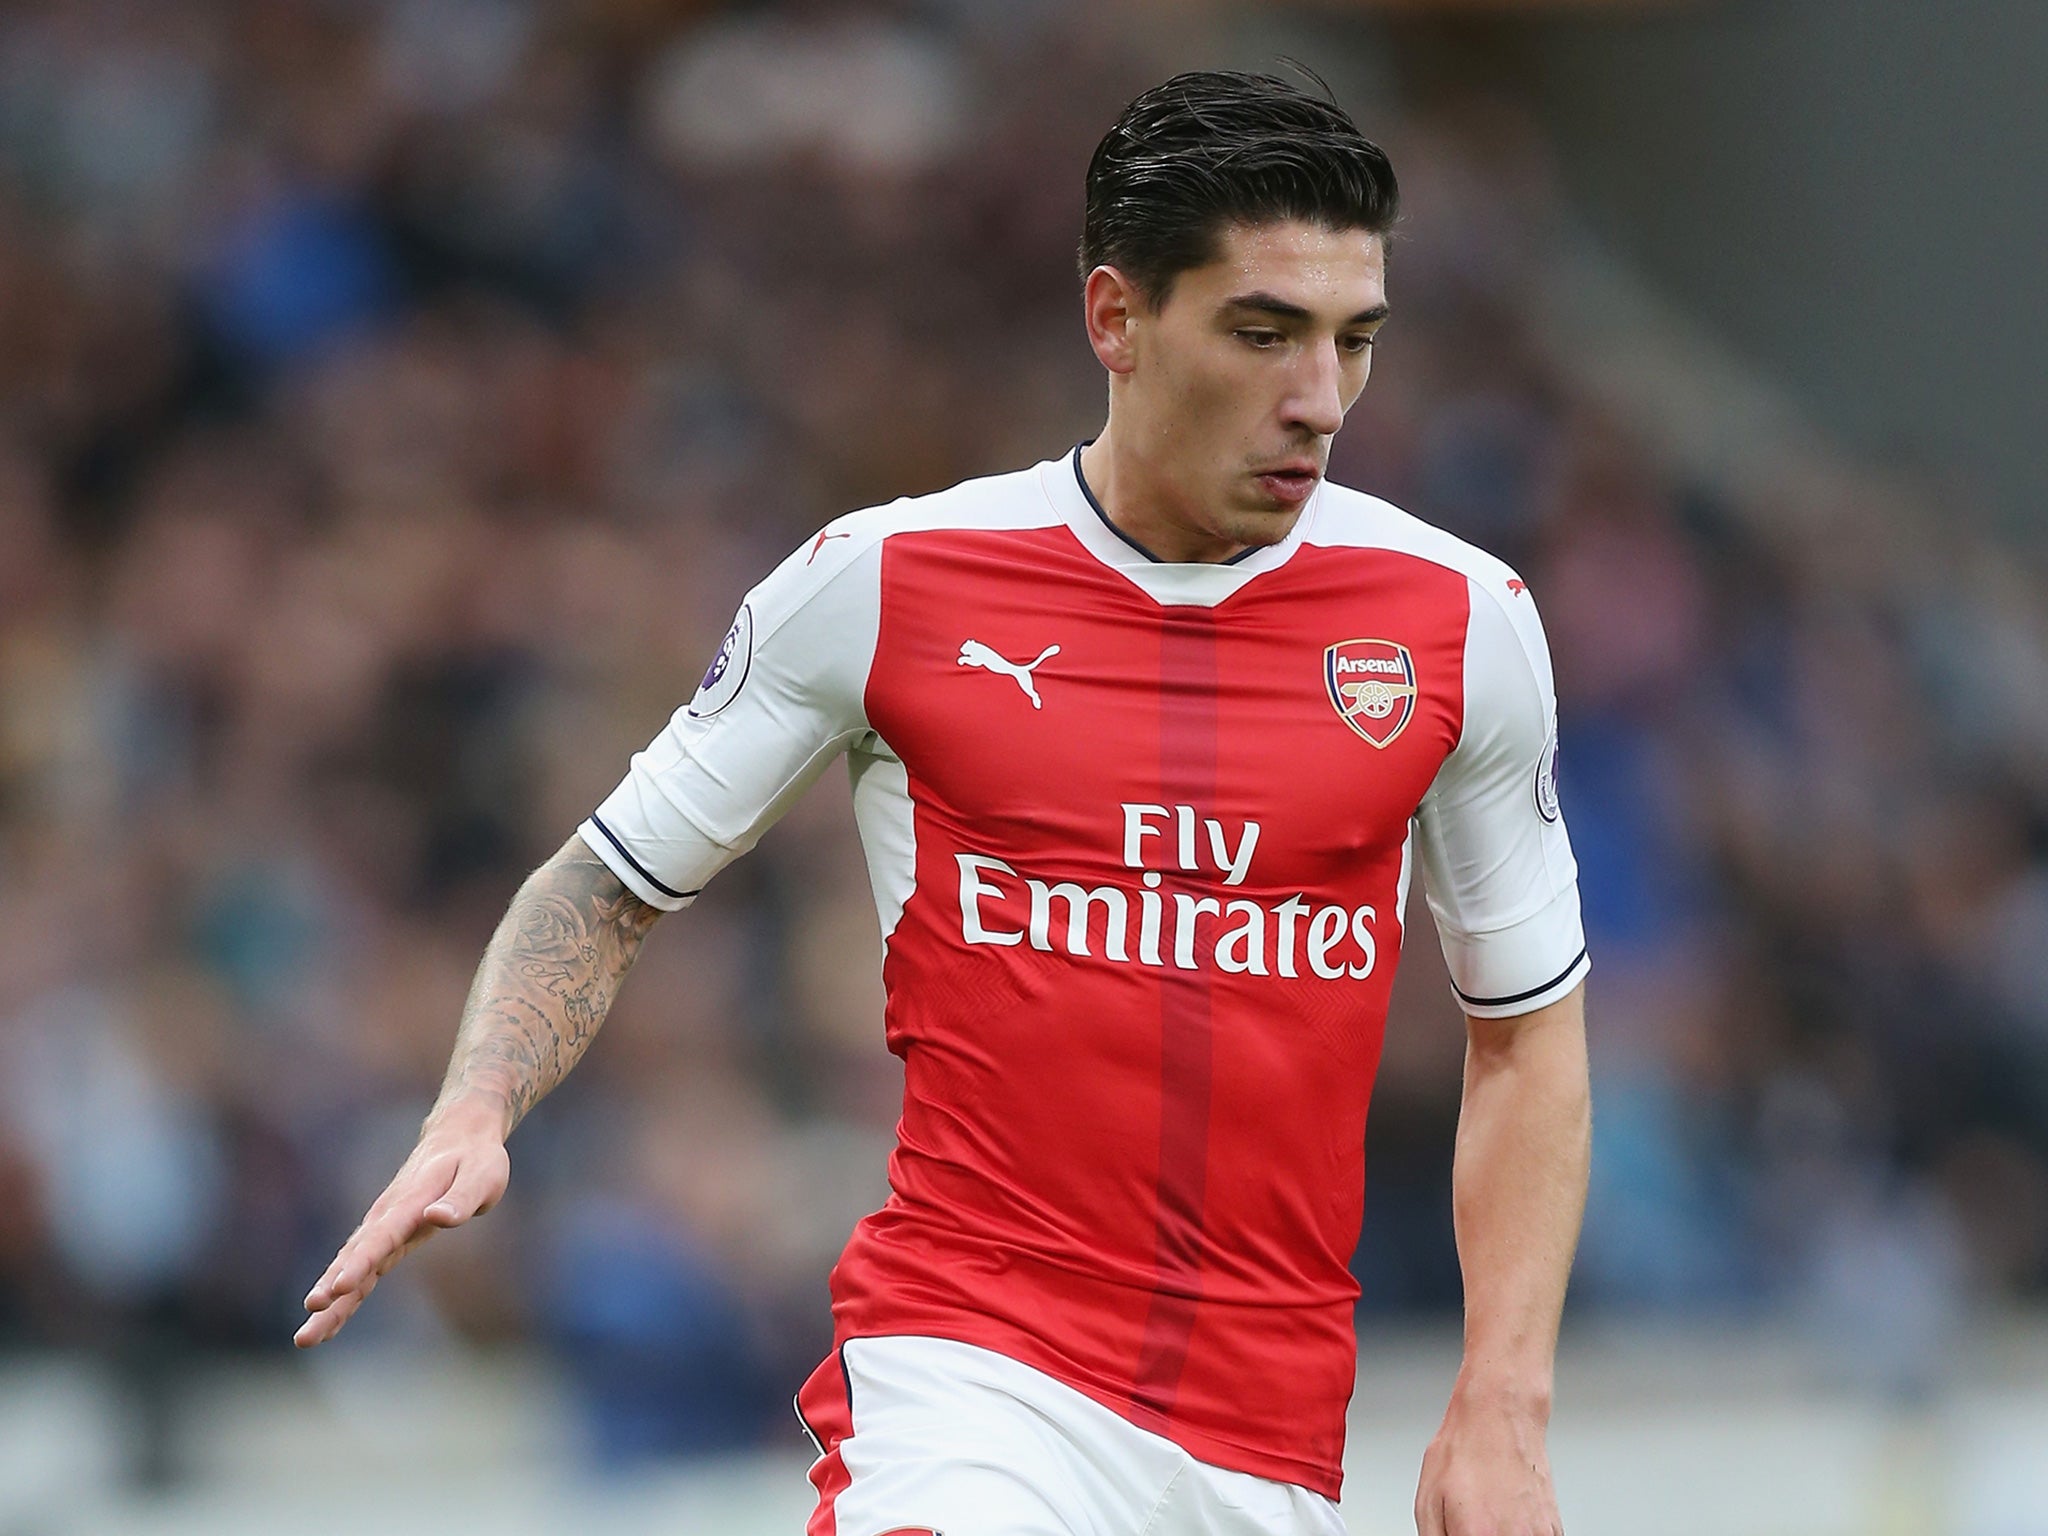 Bellerin has blossomed since breaking into Arsenal's first team